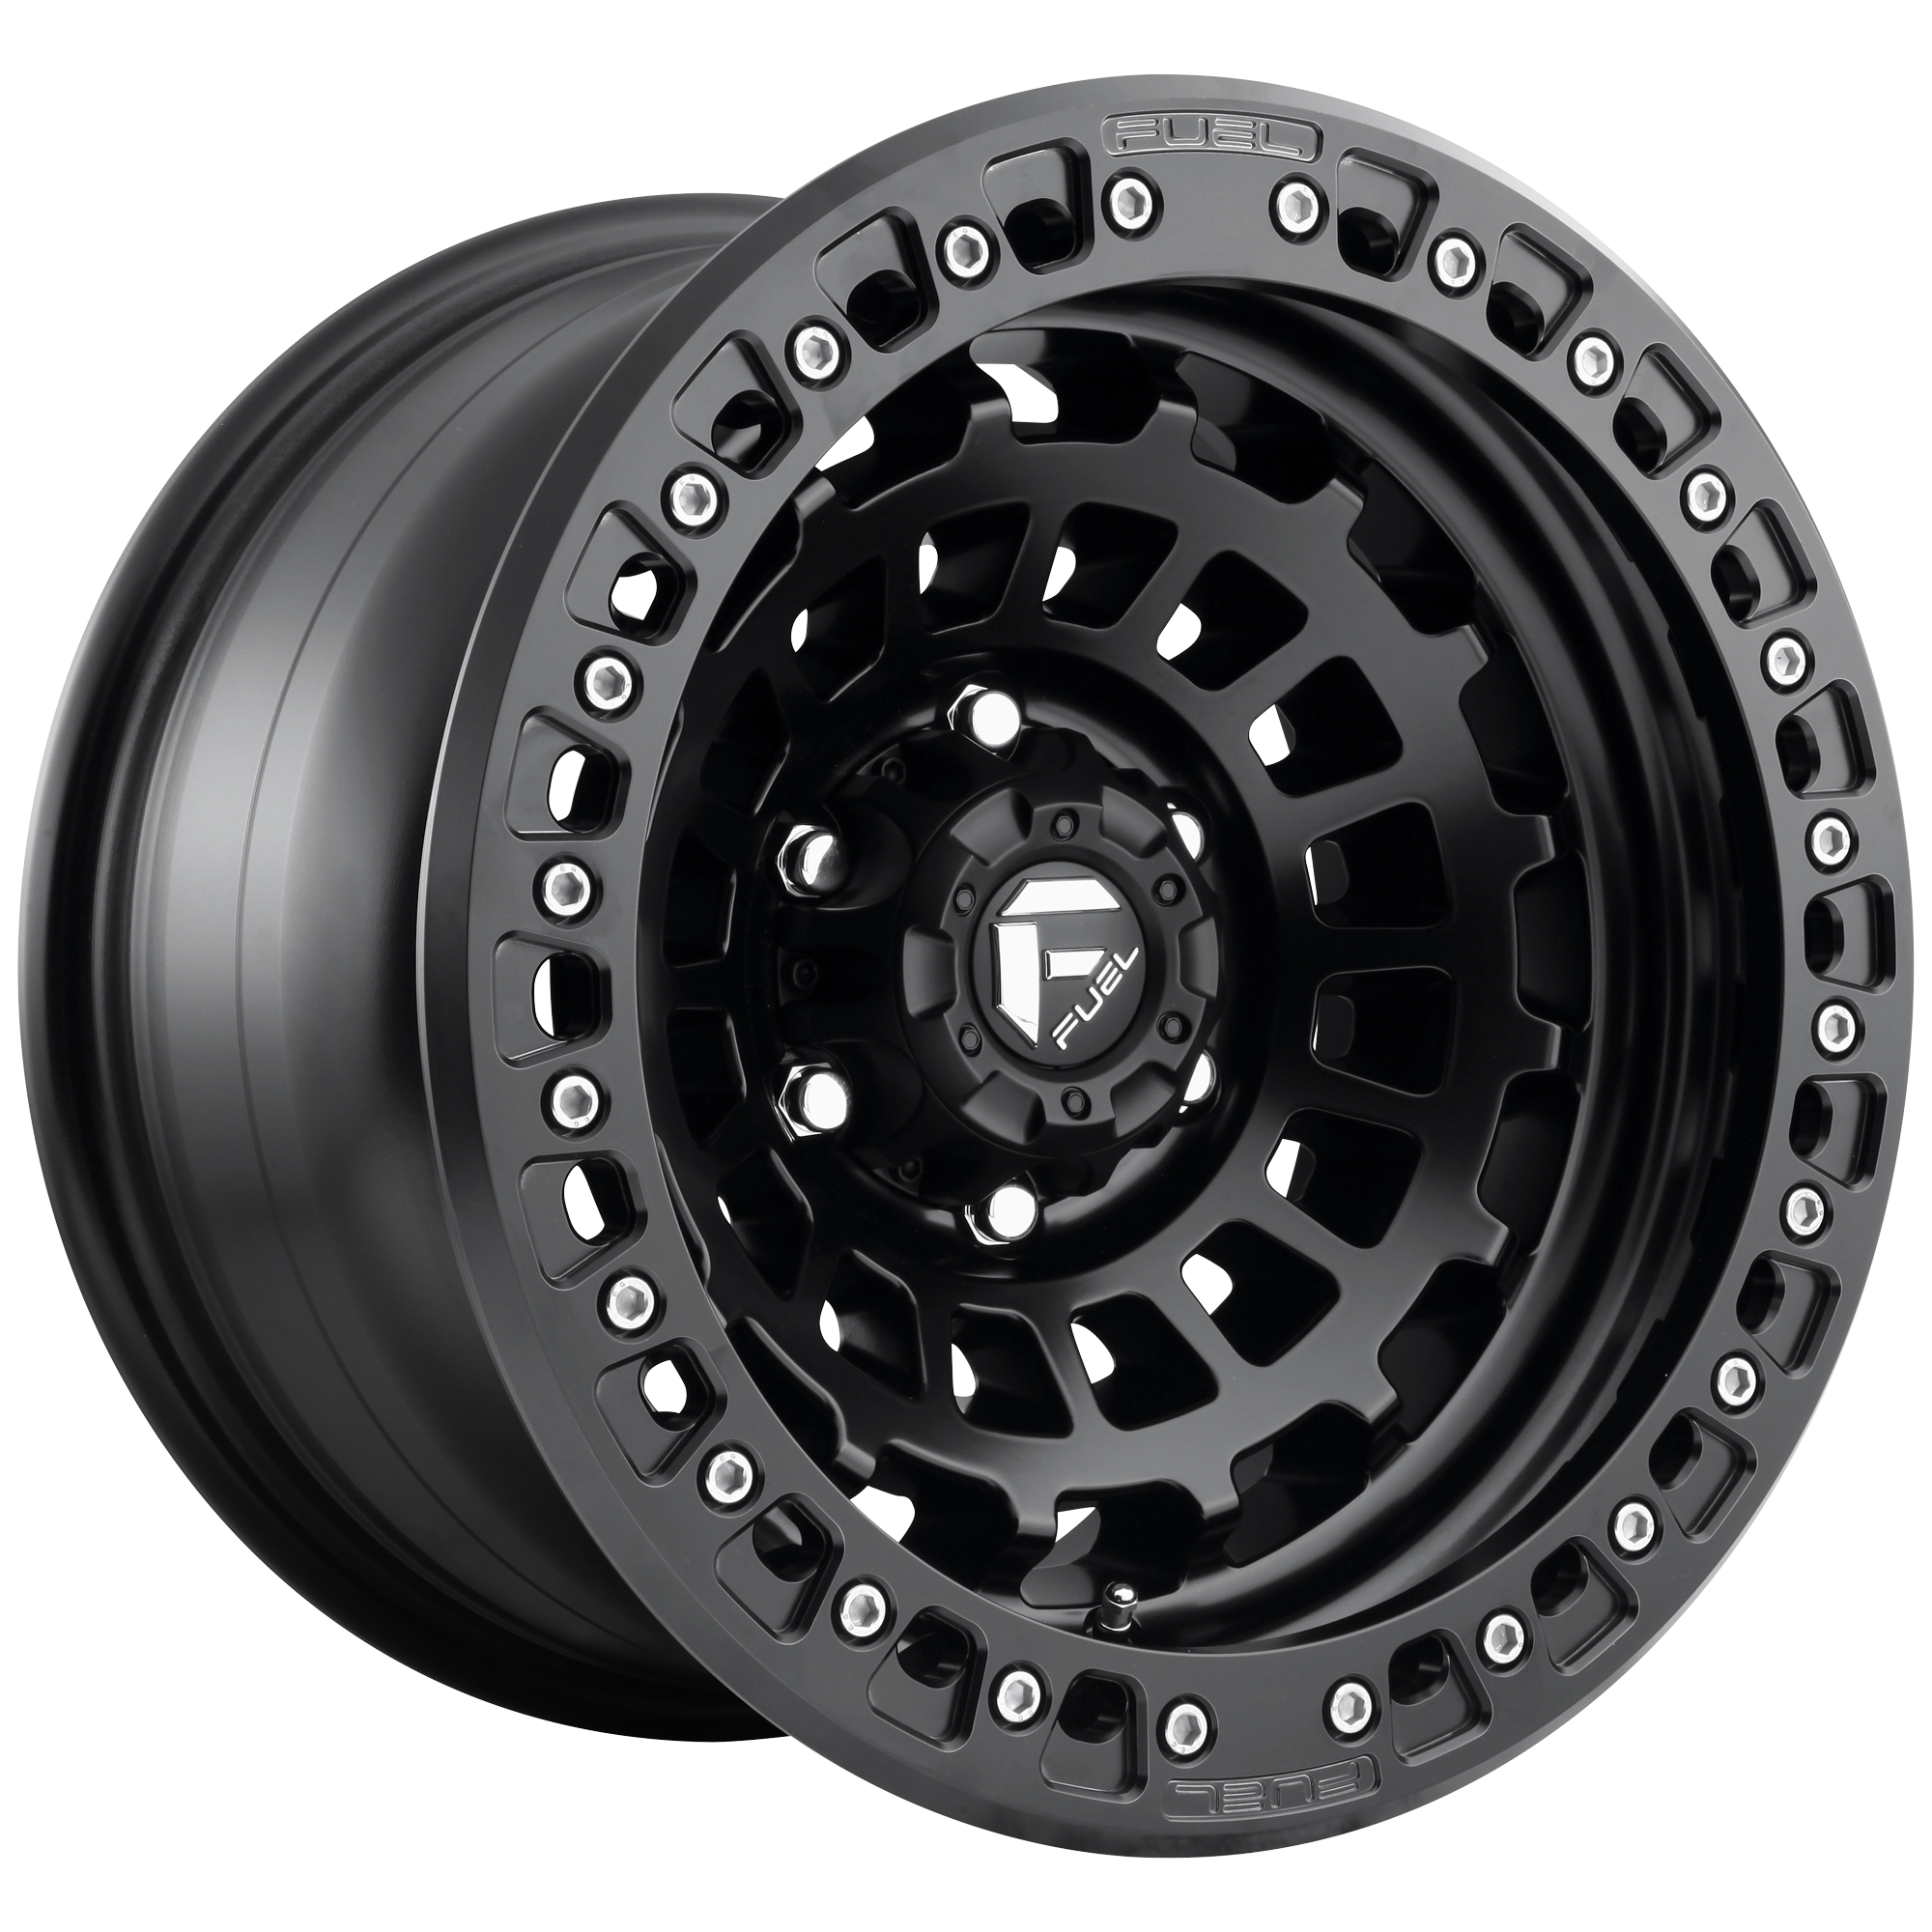 ZEPHYR BL - OFF ROAD ONLY 17x9 5x127.00 MATTE BLACK (-38 mm) - Tires and Engine Performance